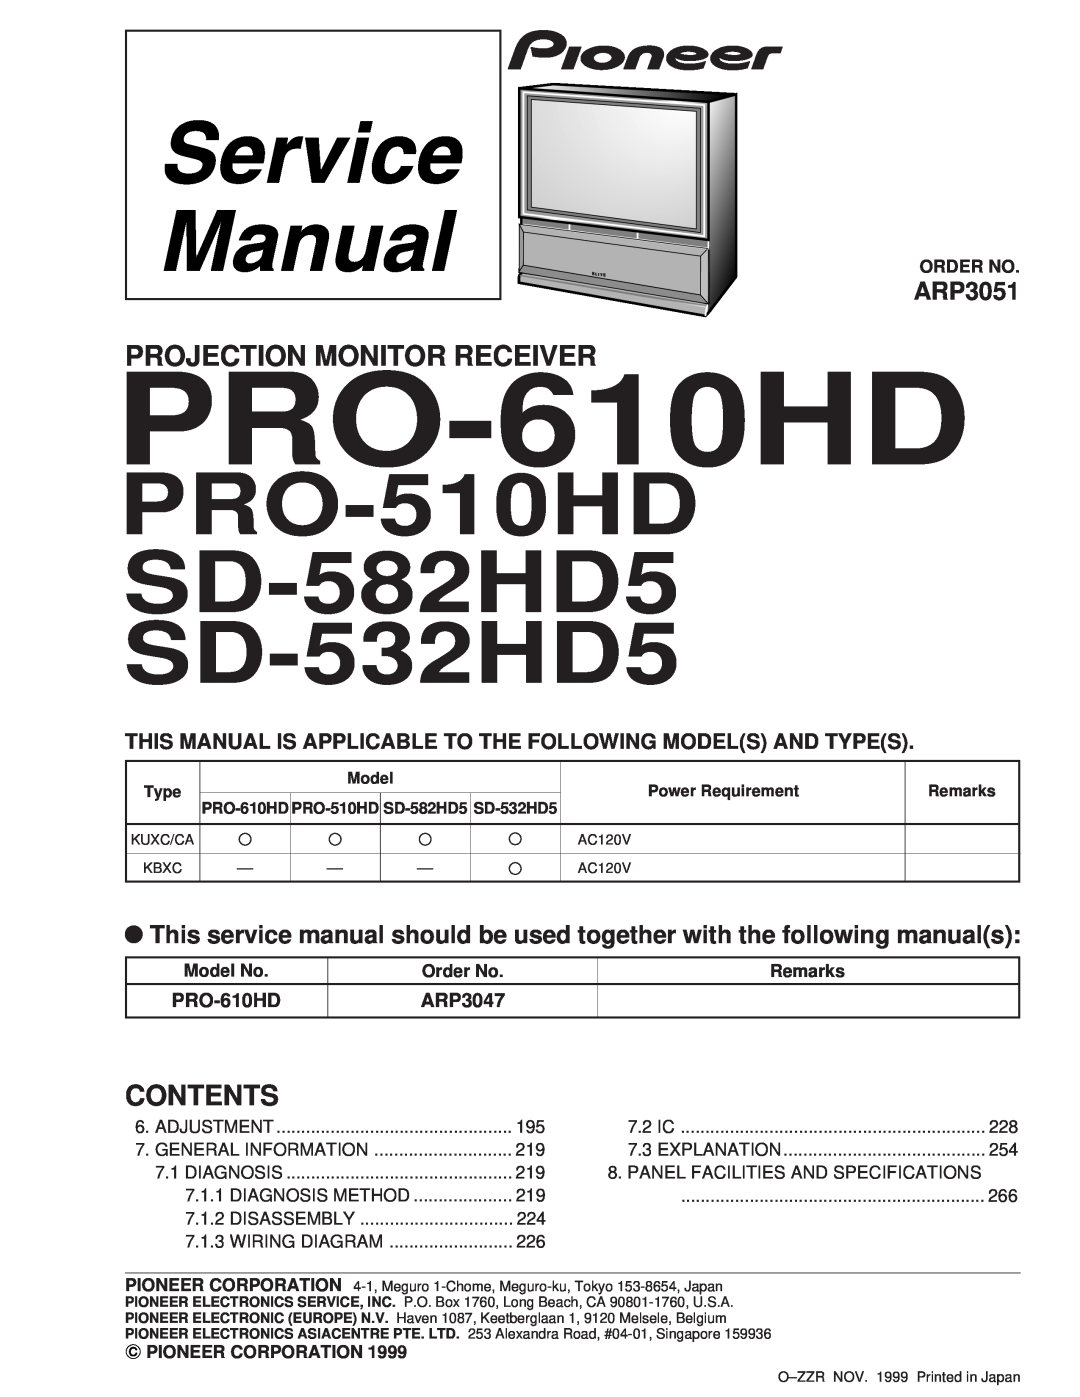 Pioneer PRO-510HD service manual ARP3051, This Manual Is Applicable To The Following Models And Types, ARP3047, PRO-610HD 